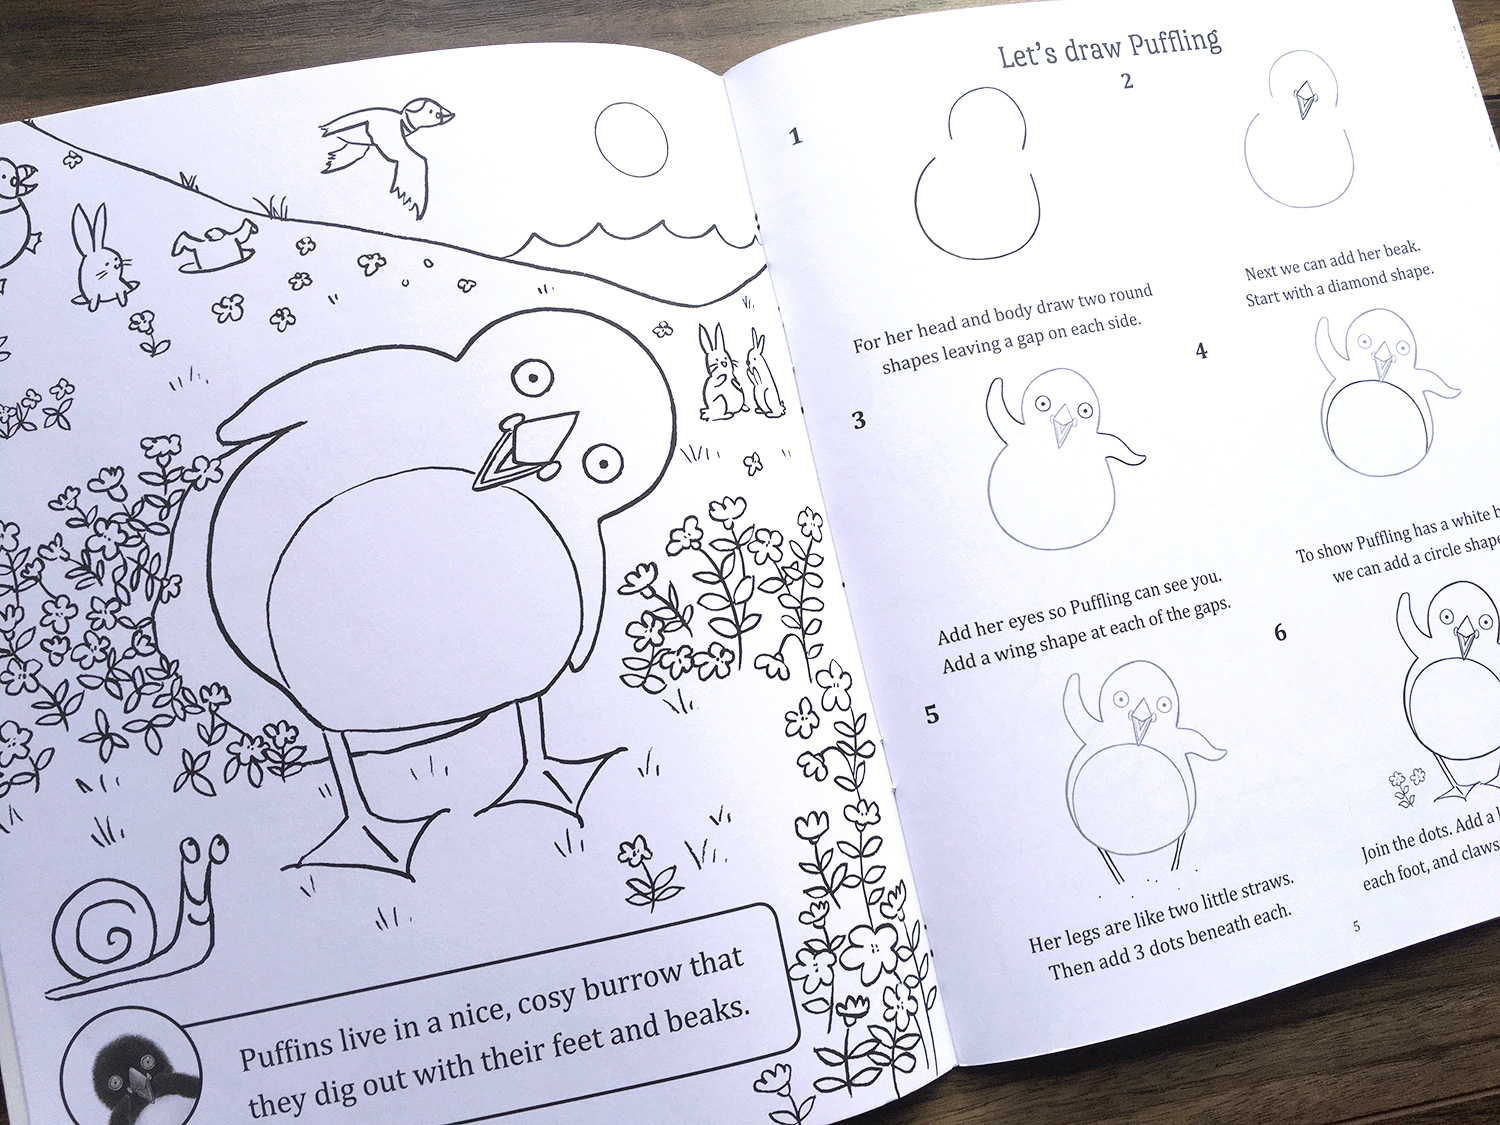 Where Are You Puffling? colour in Puffling and Draw step by step Puffling 